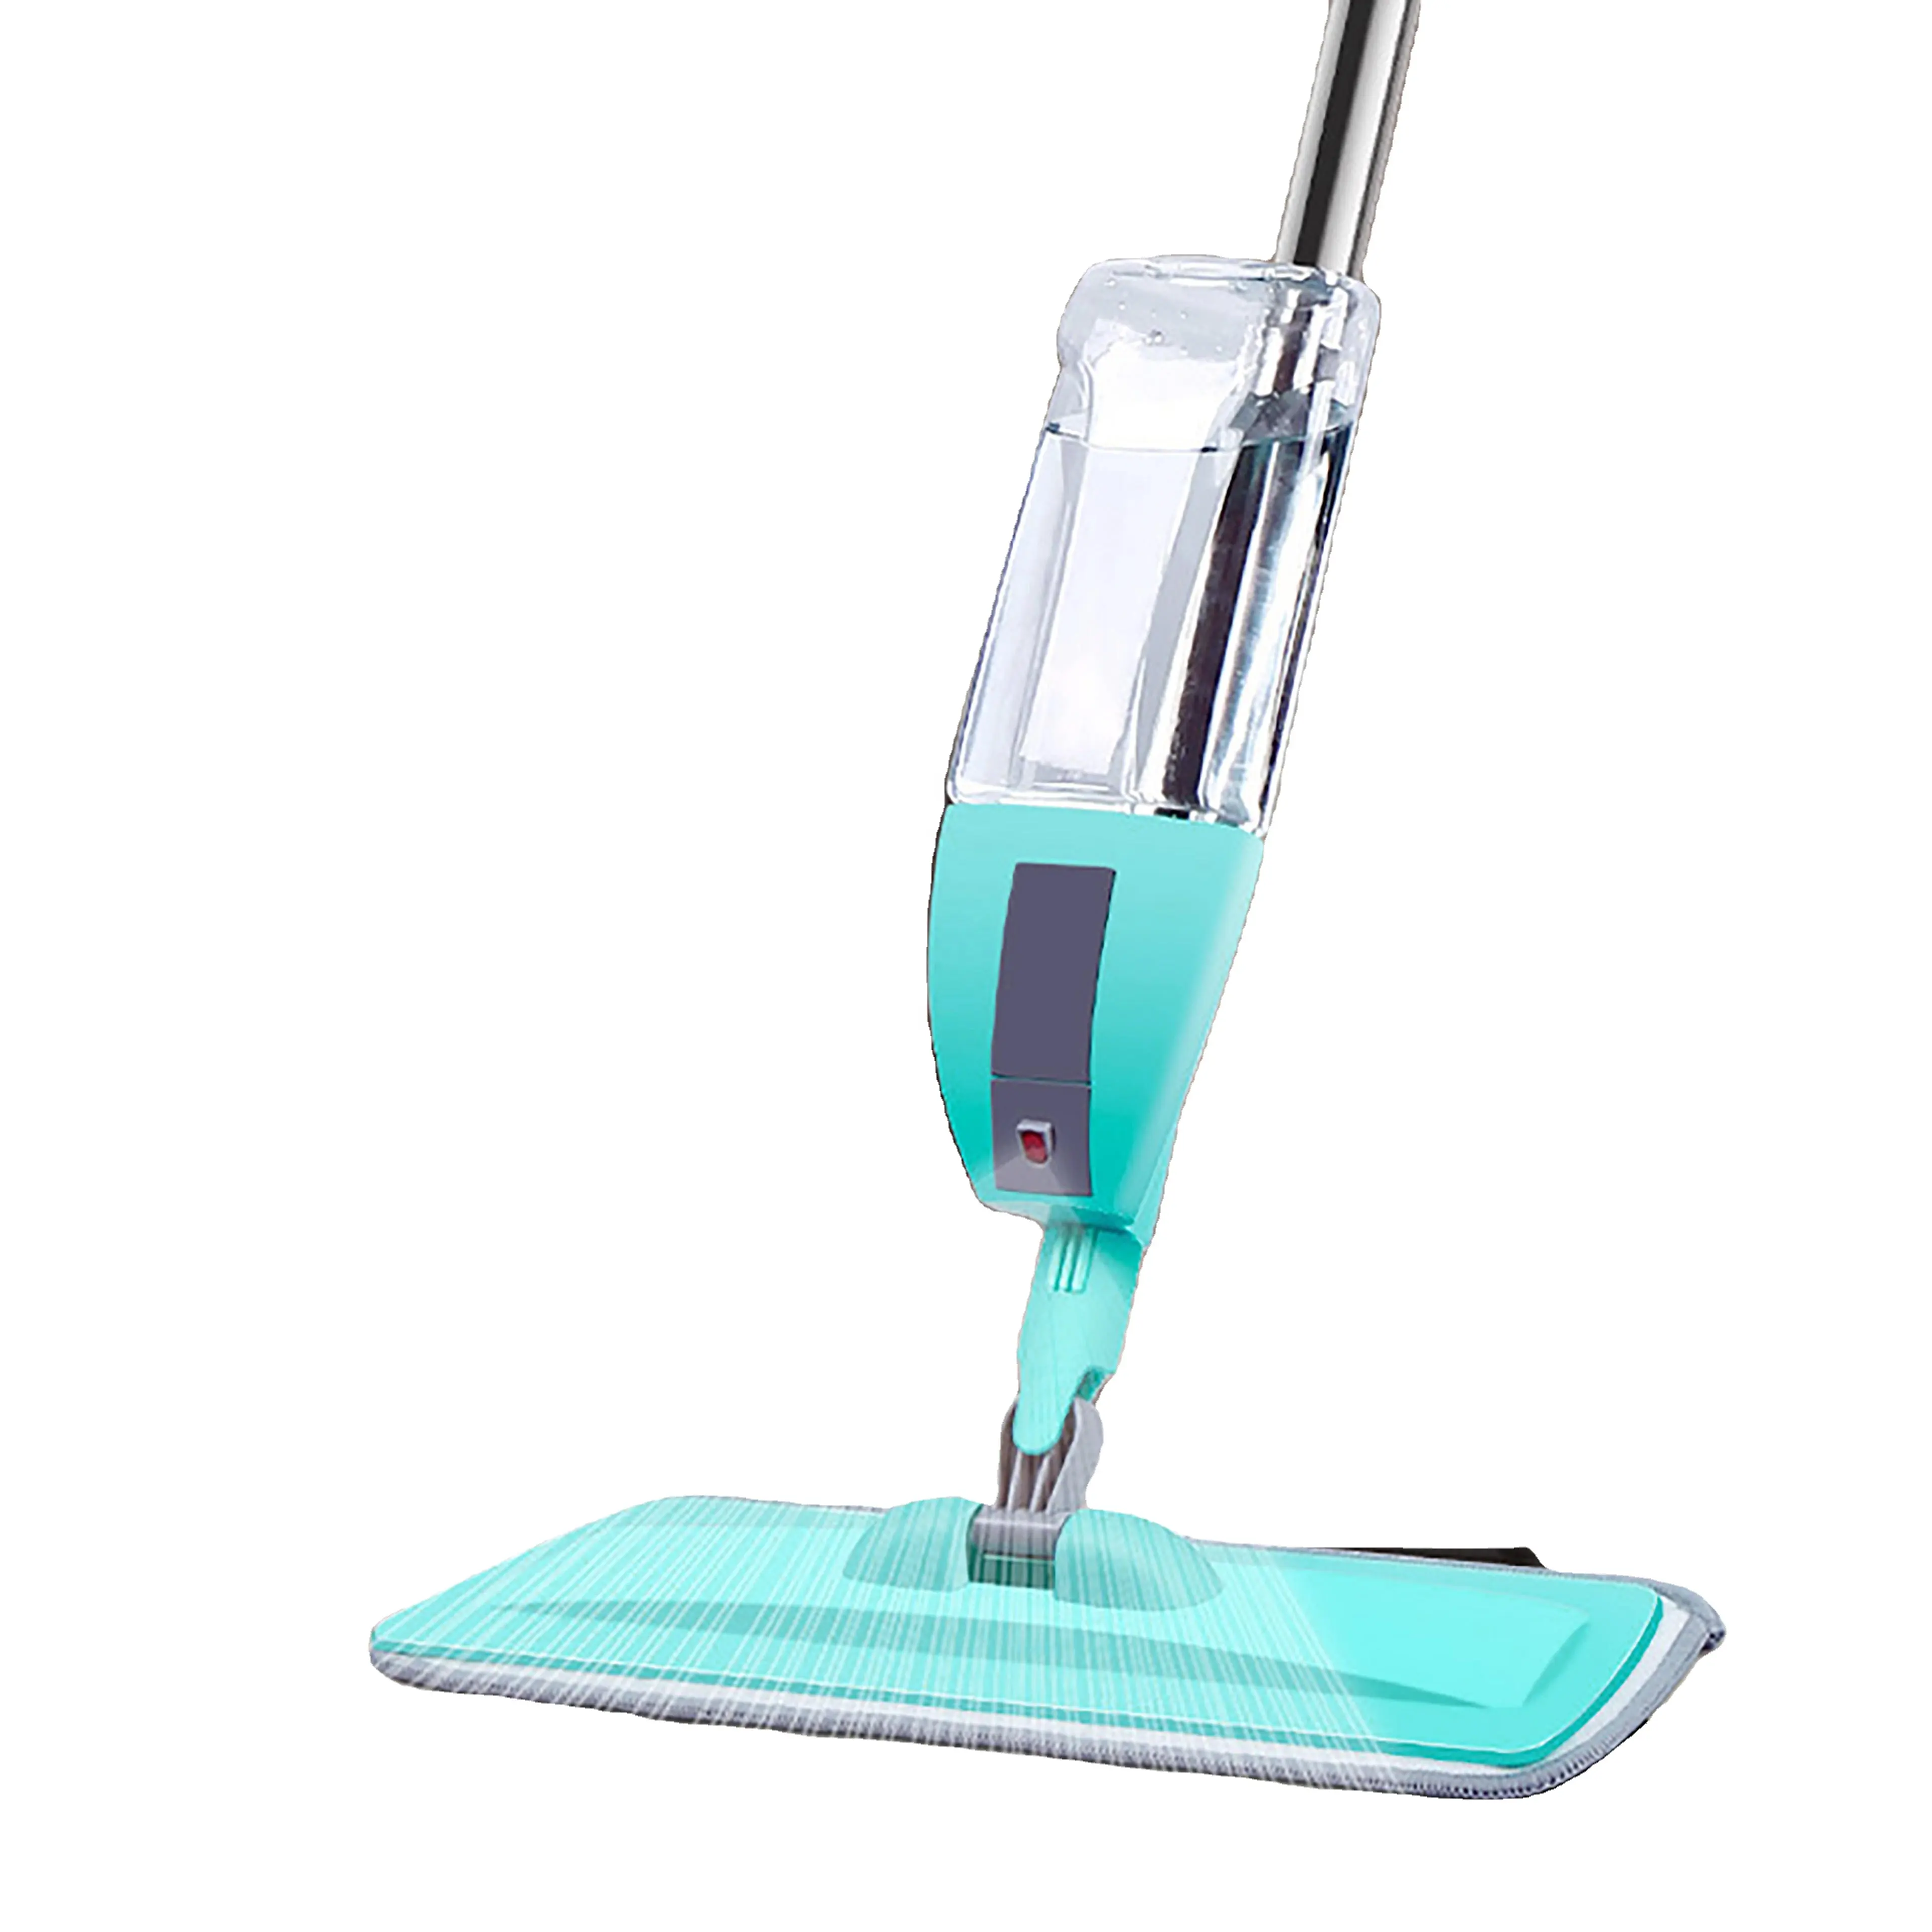 Cheapest Hands Free Magic Microfiber Flat Healthy Water Spray Mop For Floor Window House Cleaning With 360 Rotary Head